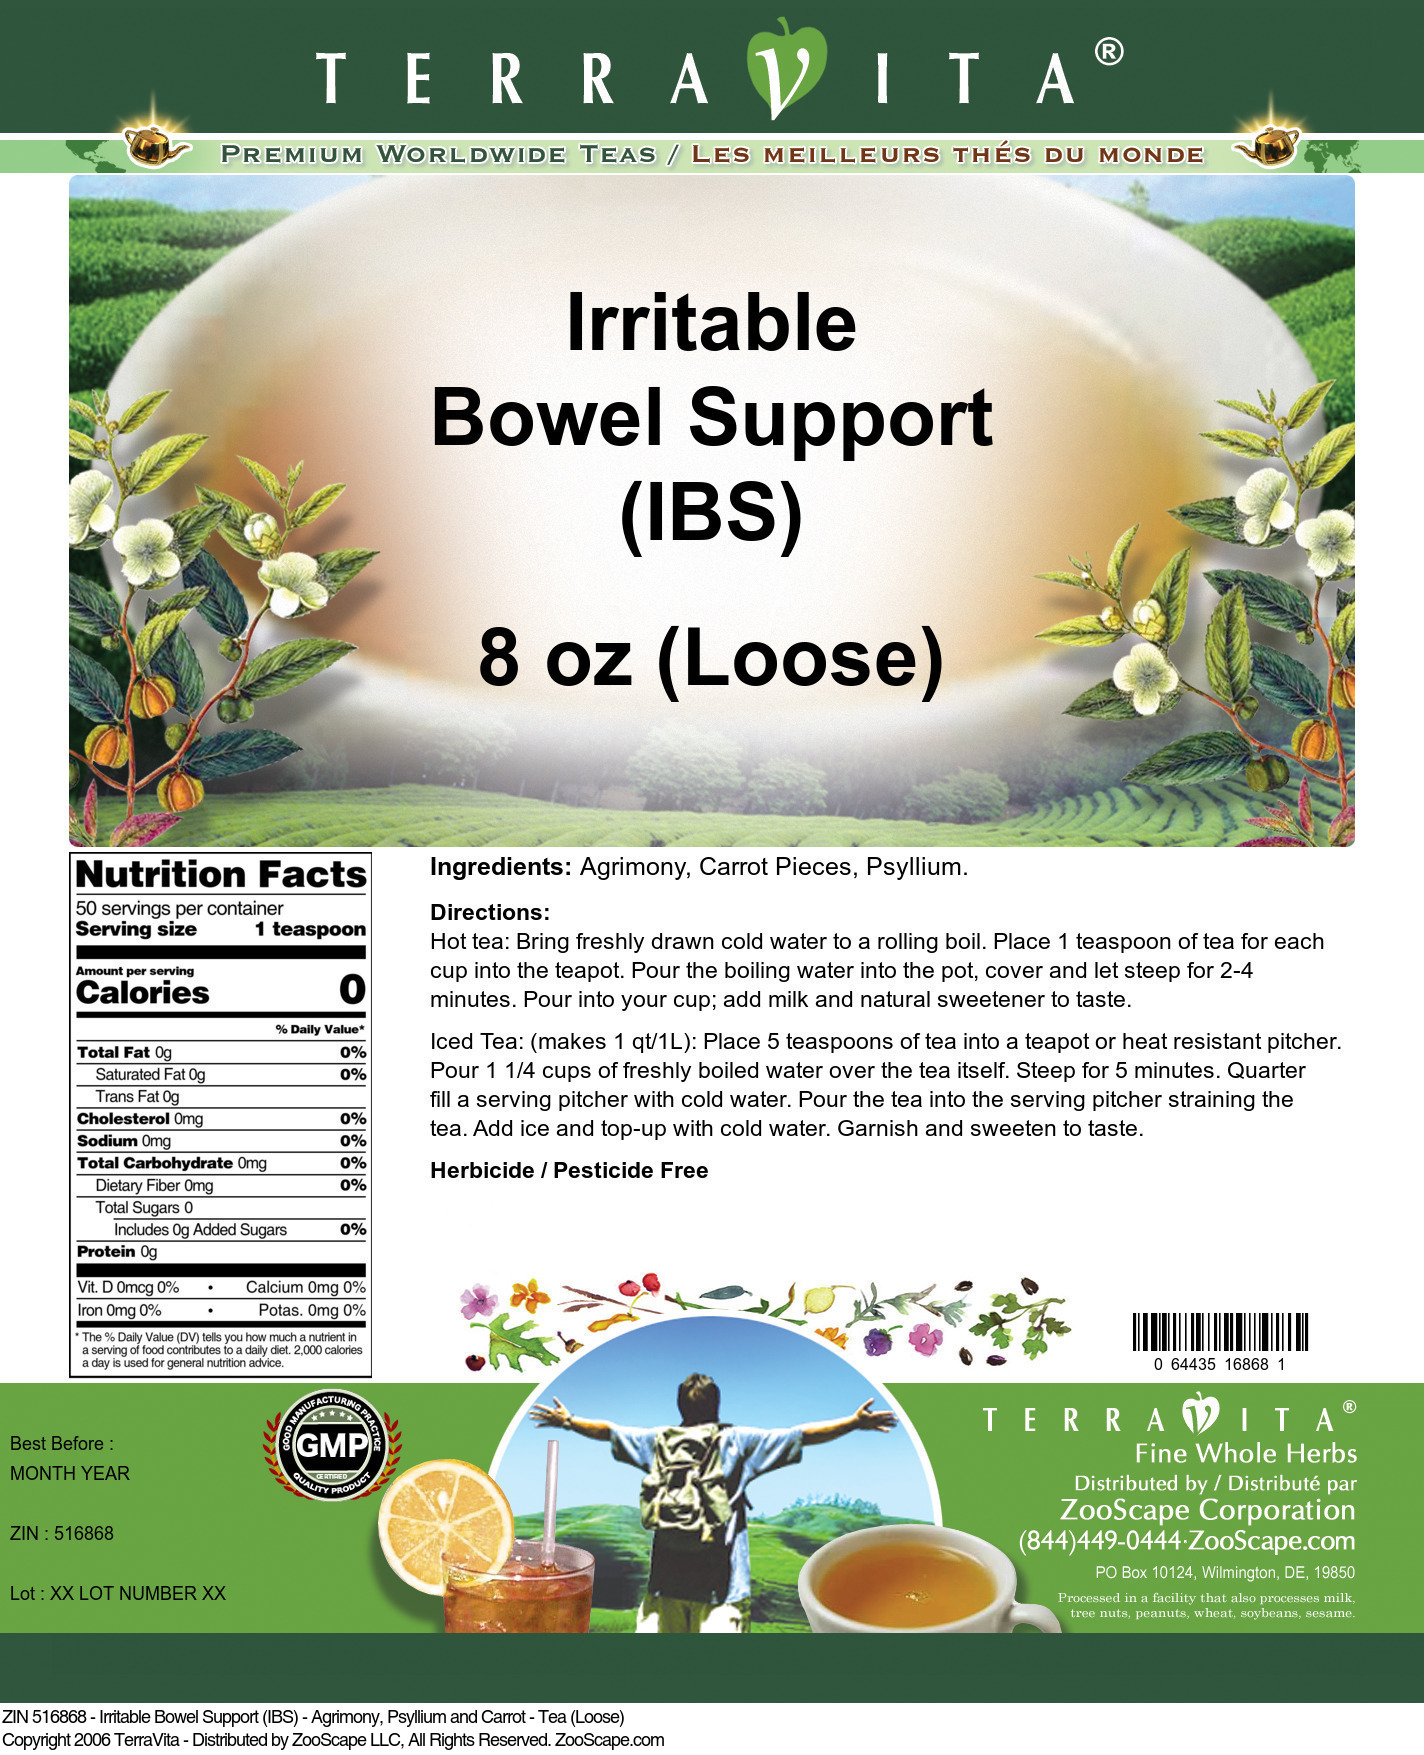 Irritable Bowel Support (IBS) - Agrimony, Psyllium and Carrot - Tea (Loose) - Label